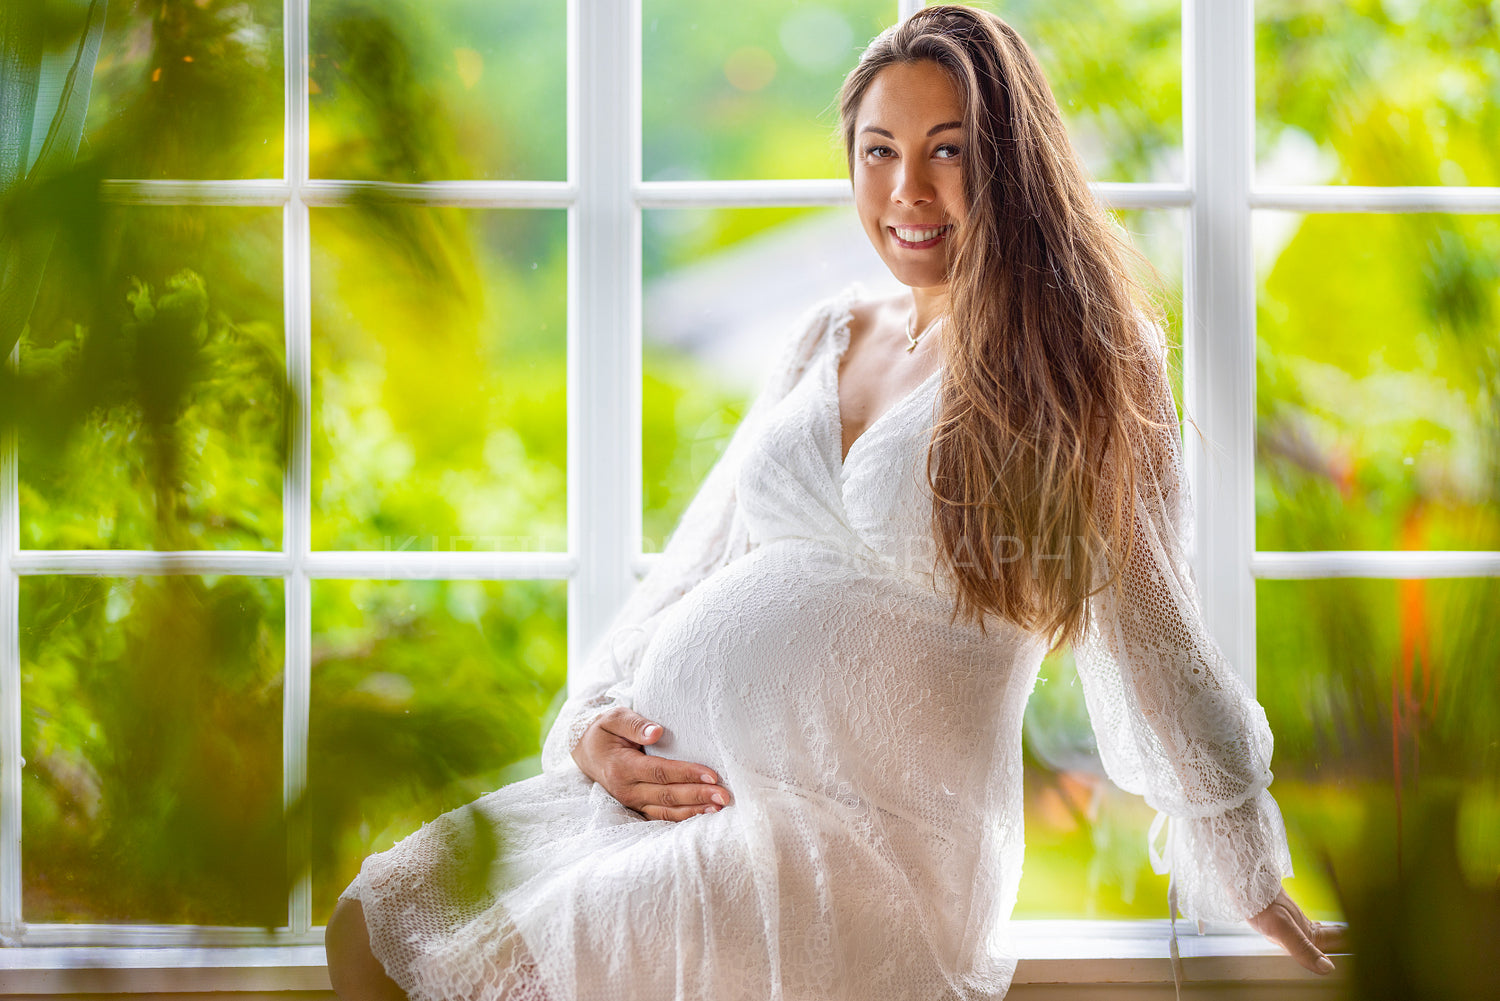 Smiling pregnant woman sitting in the window and holding her belly